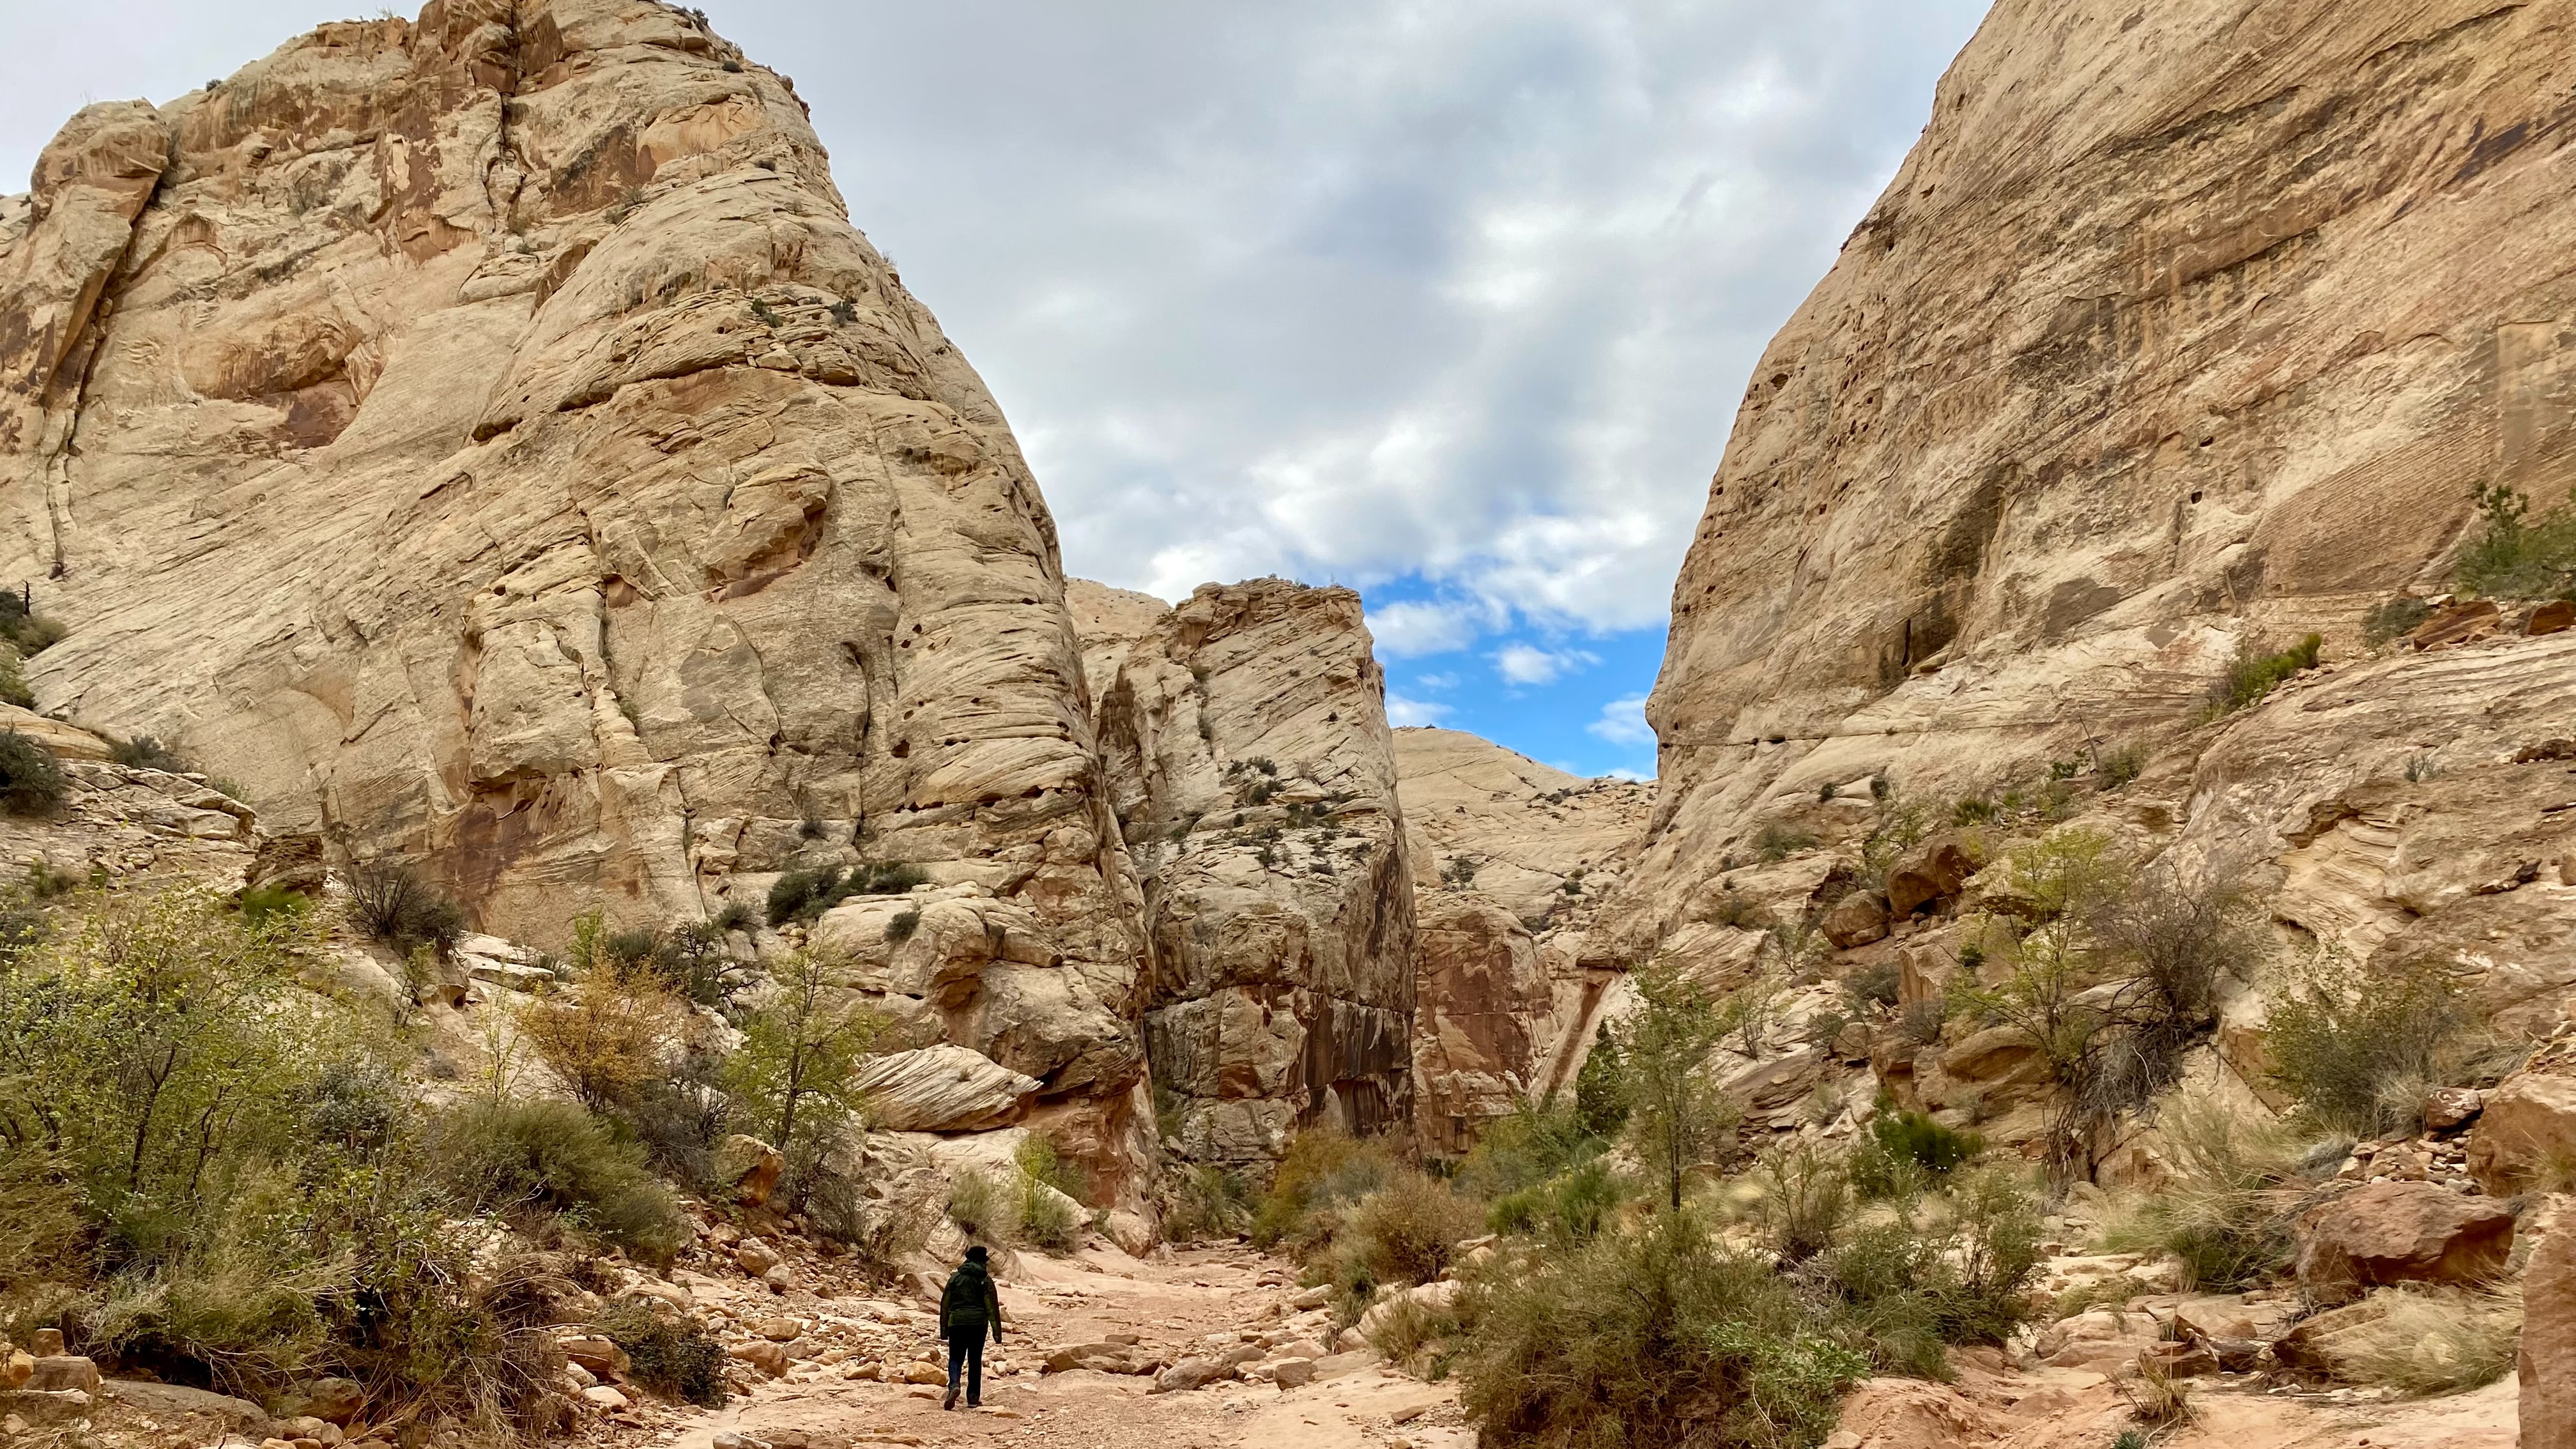 WATCH: The Best Things to Do at Capitol Reef National Park